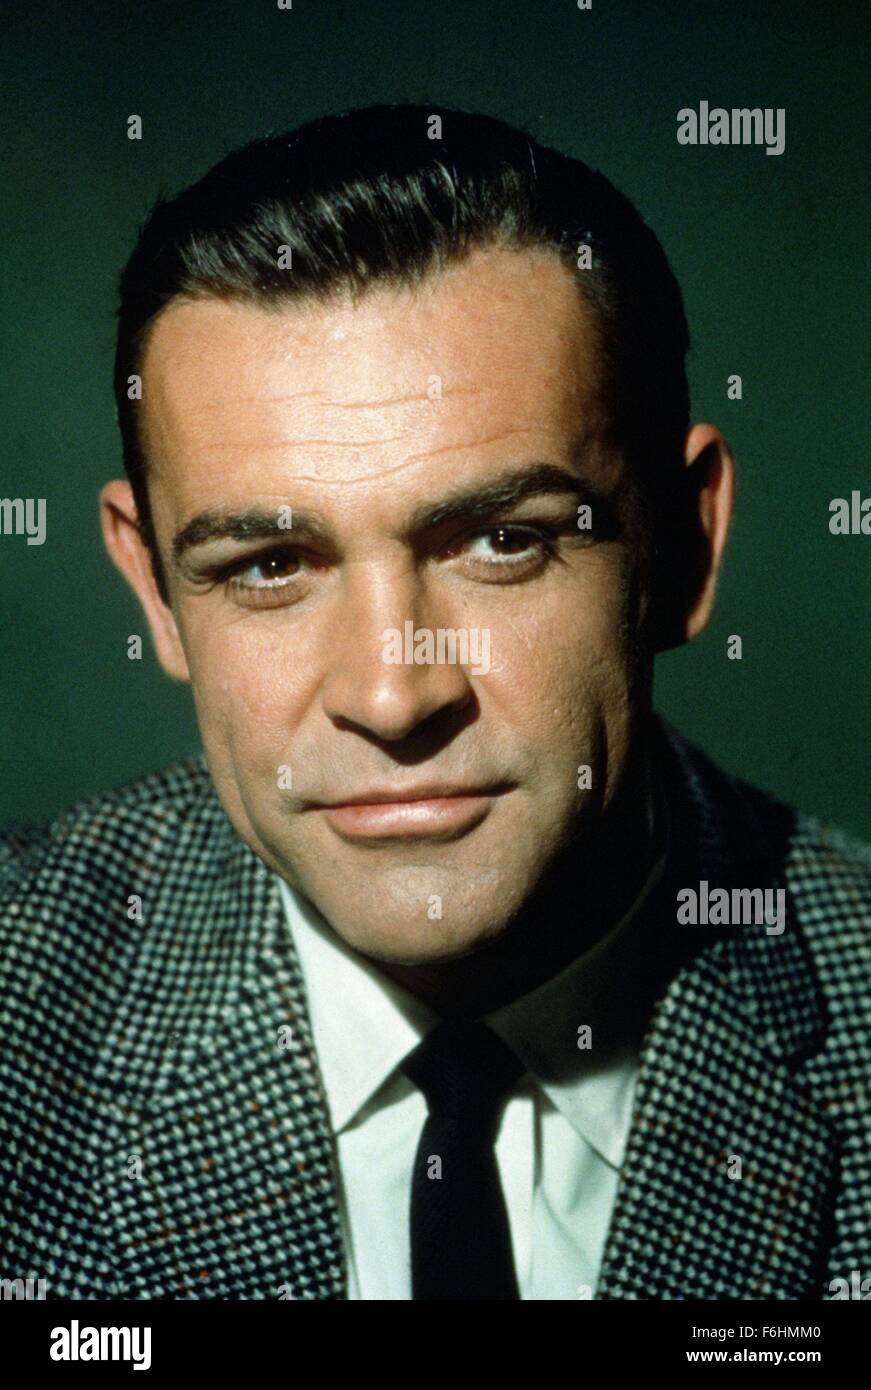 1963, Film Title: FROM RUSSIA WITH LOVE, Director: TERENCE YOUNG, Pictured: SEAN CONNERY, SEAN ASJAMES BOND CONNERY, JAMES BOND. (Credit Image: SNAP) Stock Photo